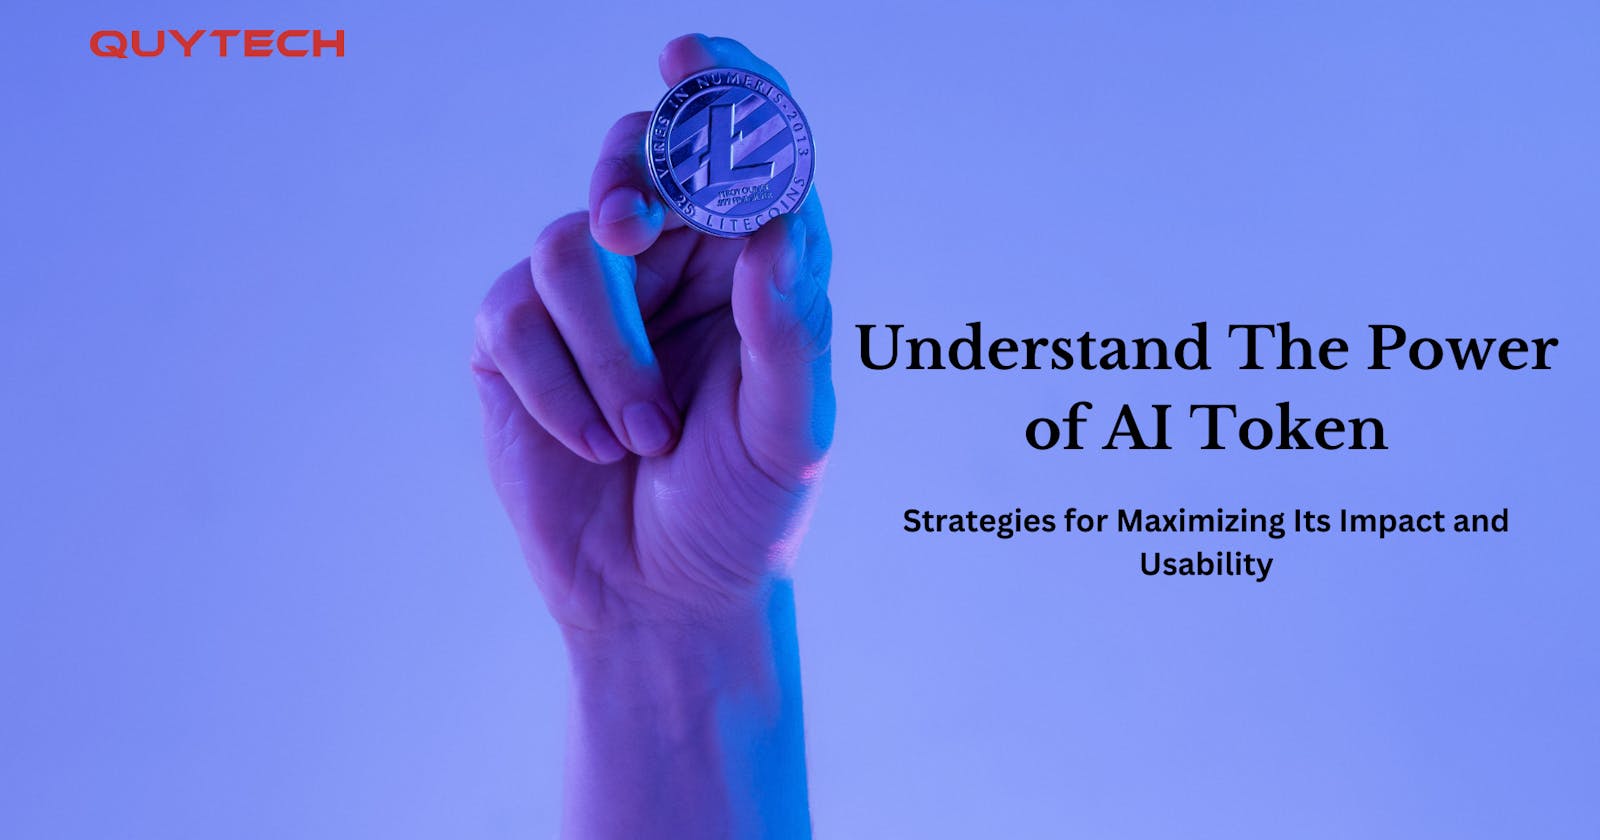 Exploring The Power of AI Token: Strategies for Maximizing Its Impact and Usability